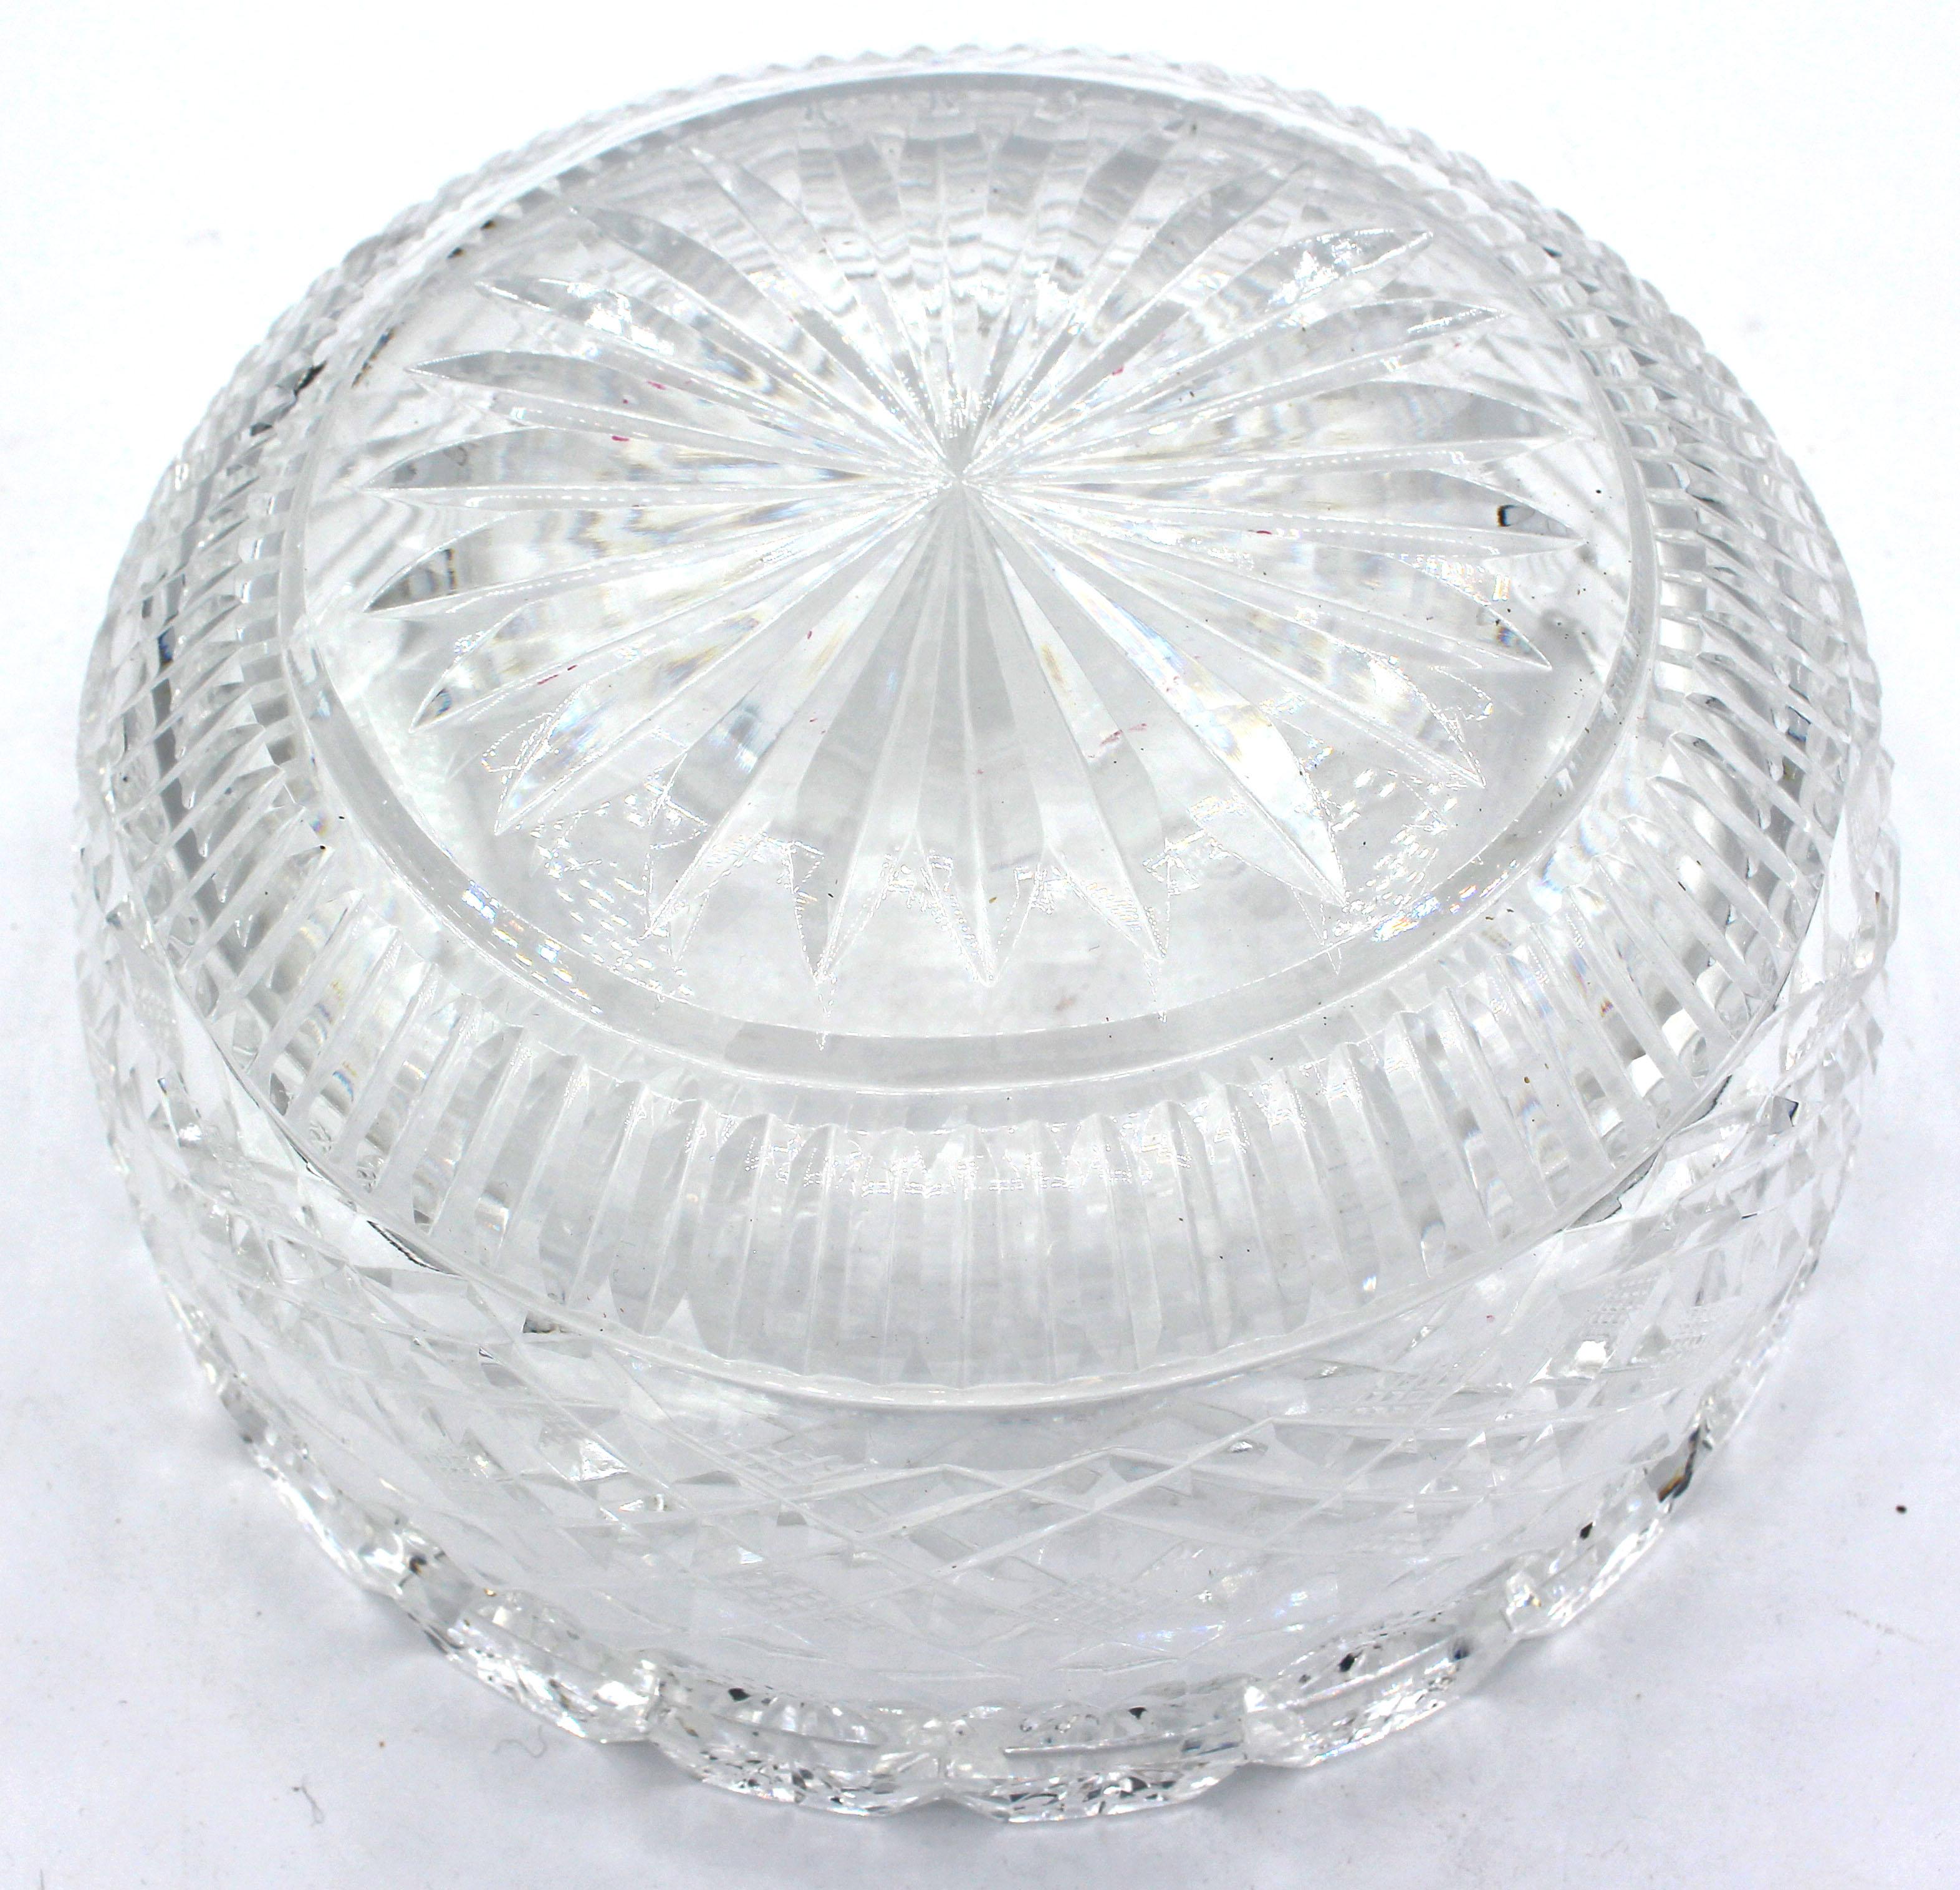 Late 19th to Early 20th Century English Cut Glass Fruit Bowl In Good Condition For Sale In Chapel Hill, NC